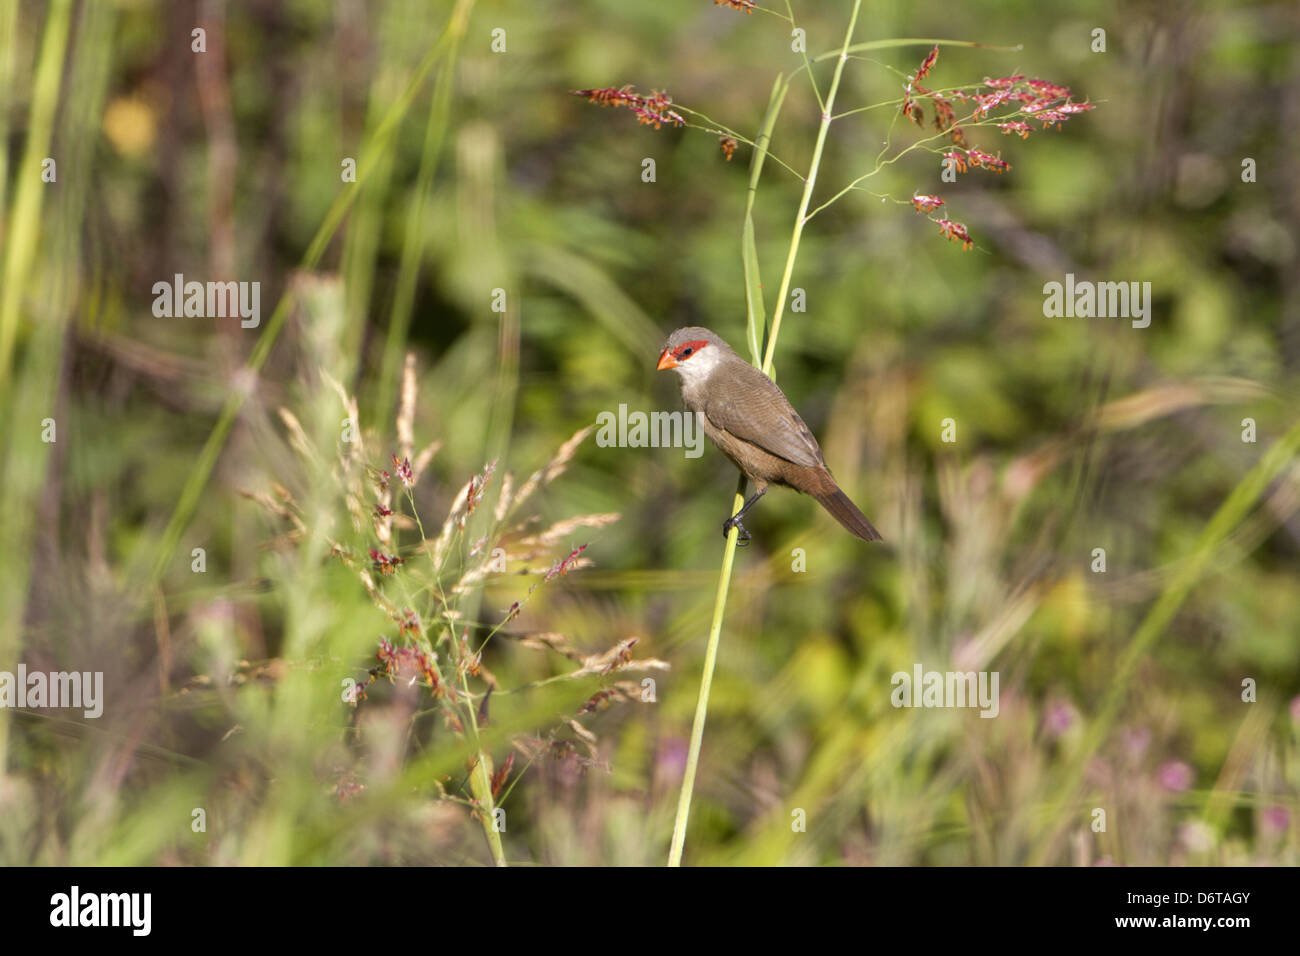 Common Waxbill (Estrilda astrild) introduced species, adult, perched on stem, Extremadura, Spain, September Stock Photo